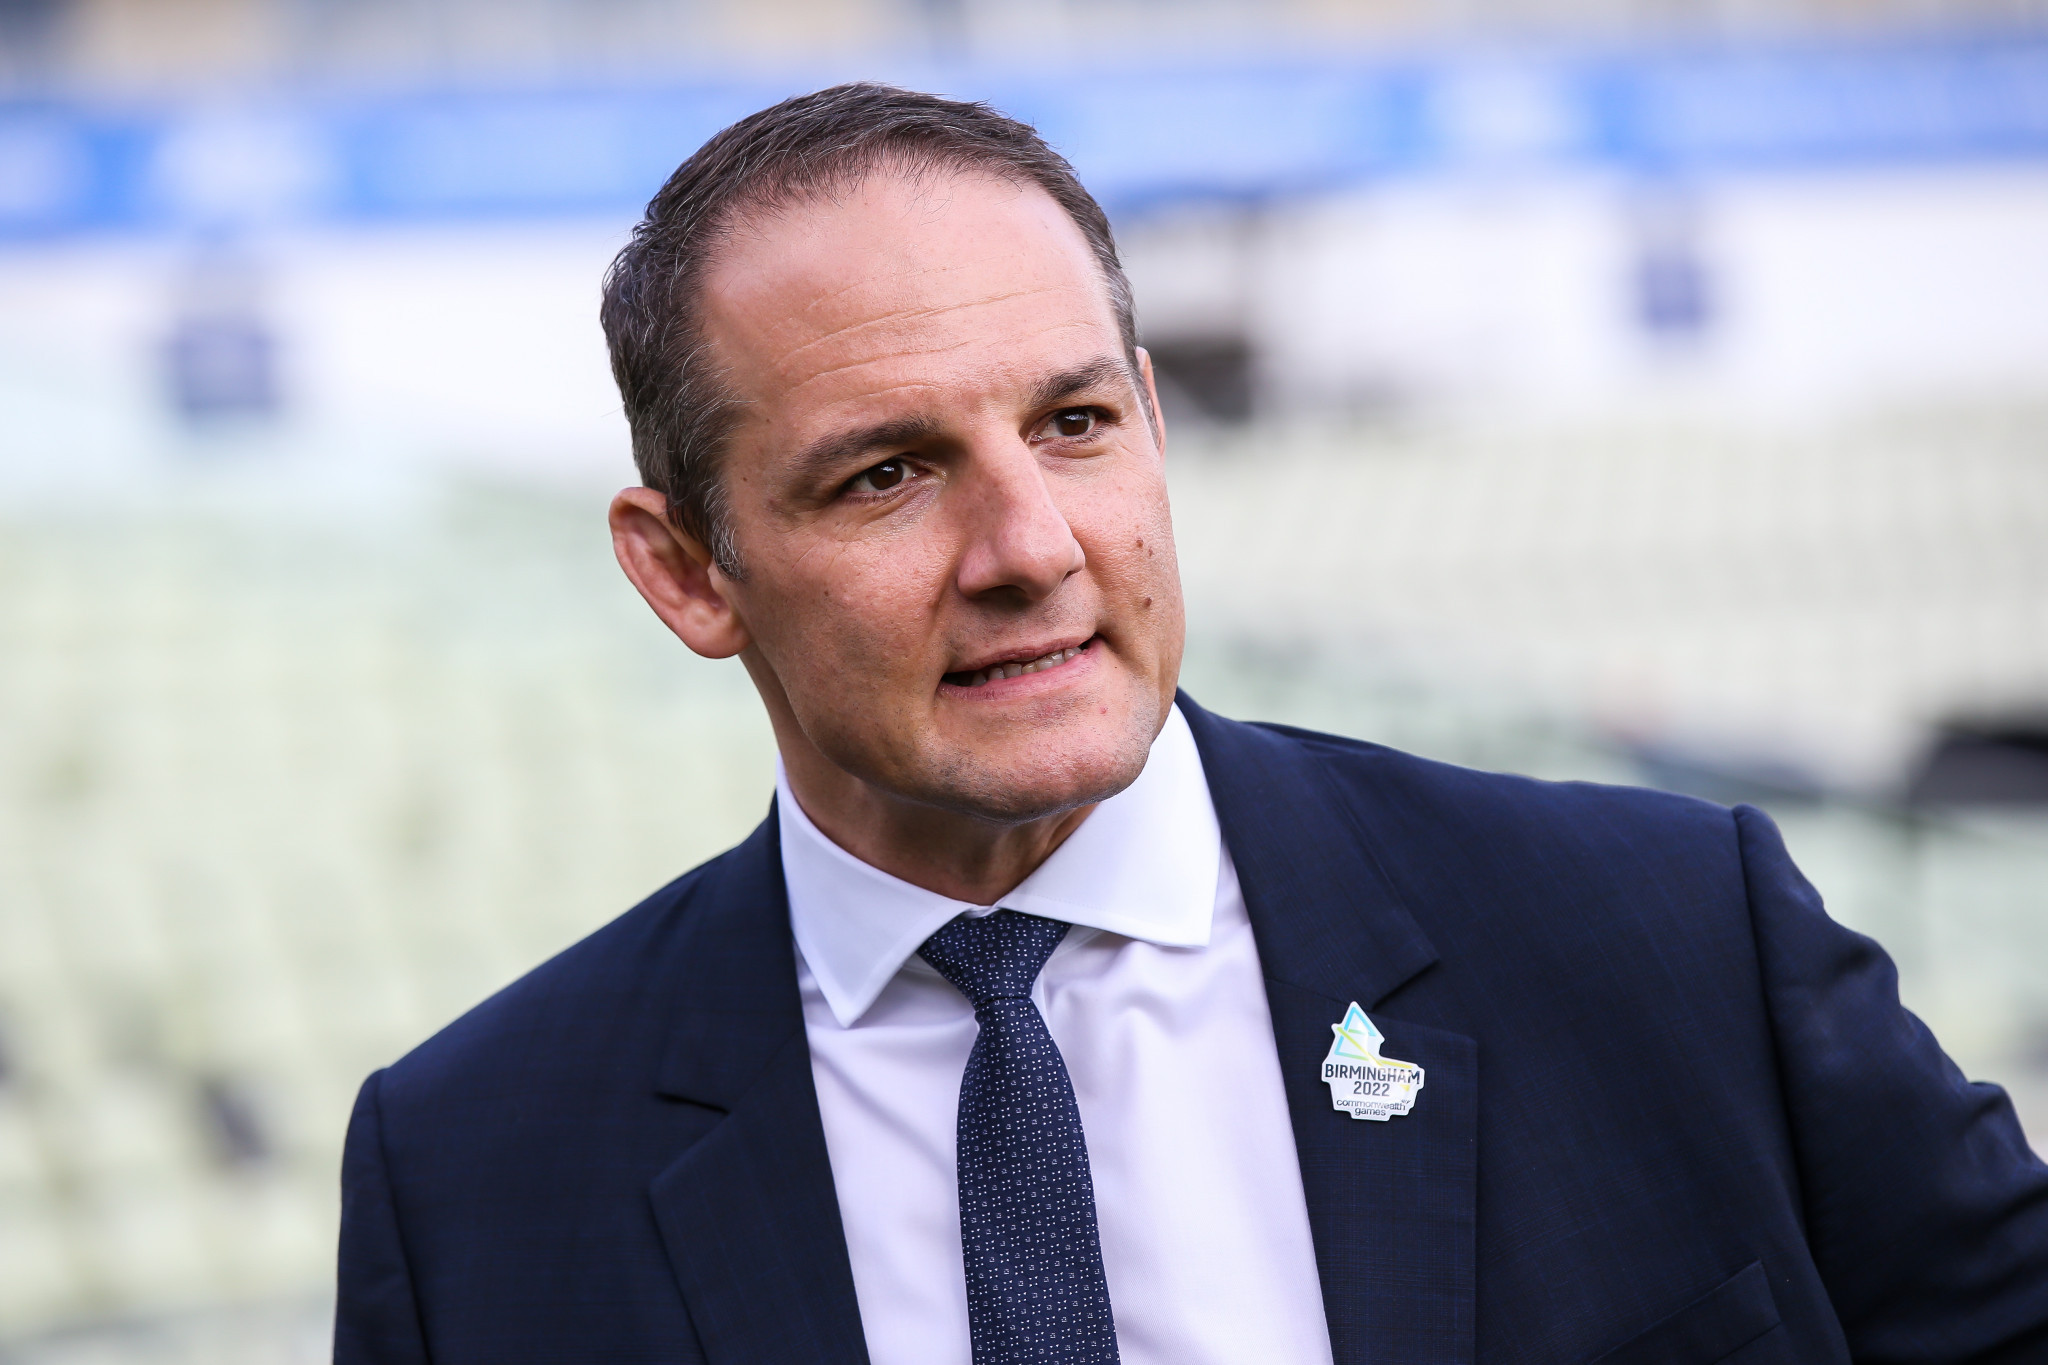 Former CGF chief executive David Grevemberg is to sit on the Scottish Rugby Board ©Getty Images